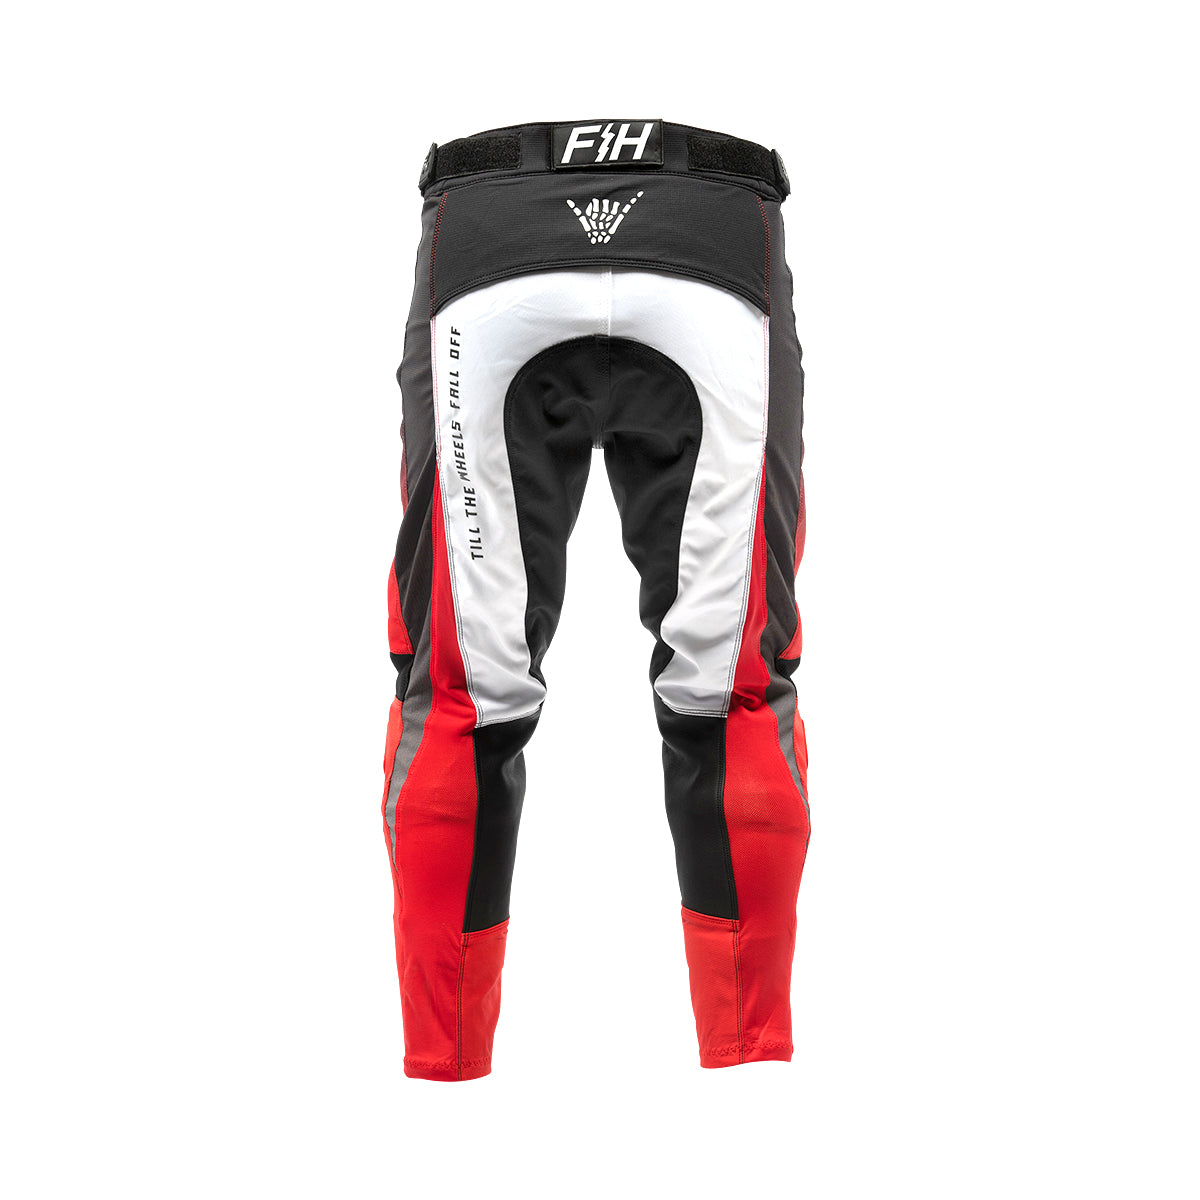 Grindhouse Twitch Youth Pant - Black/Red